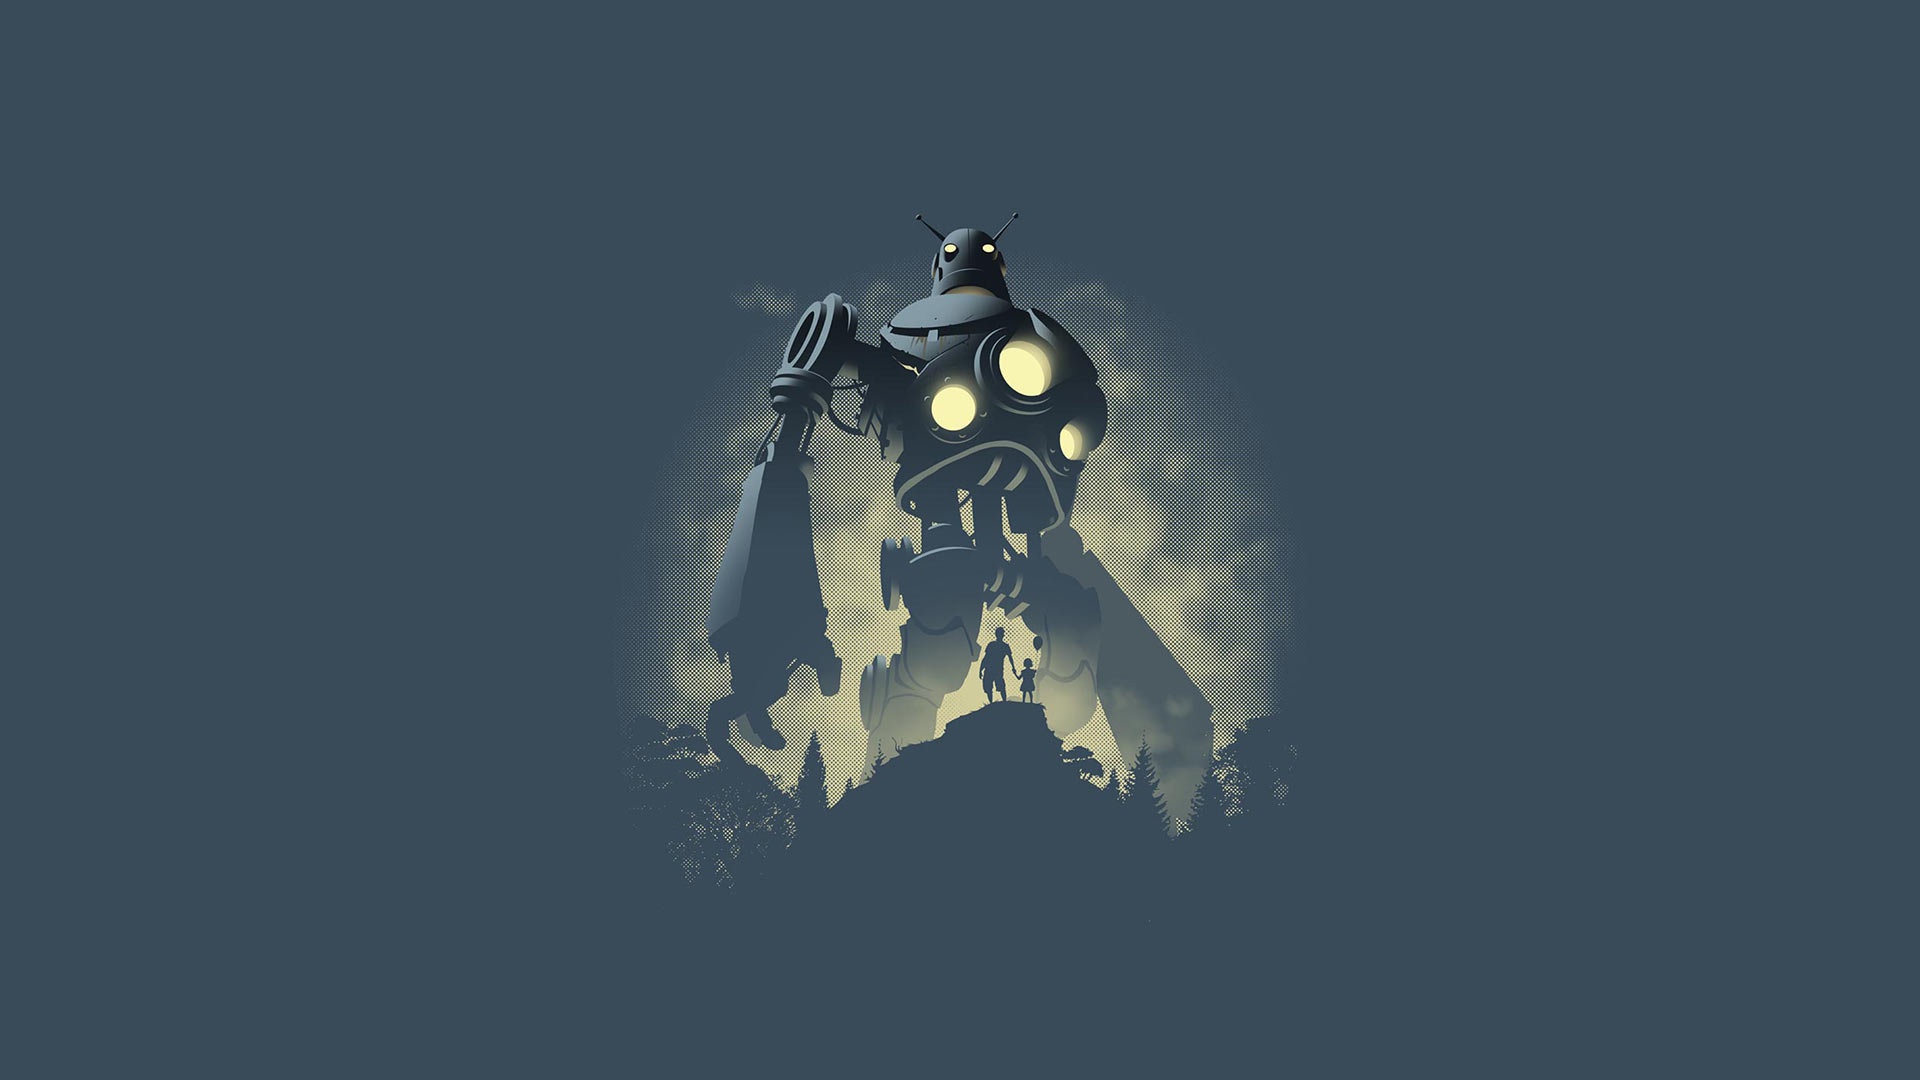 Movies Animated Movies The Iron Giant 1999 Year 1920x1080